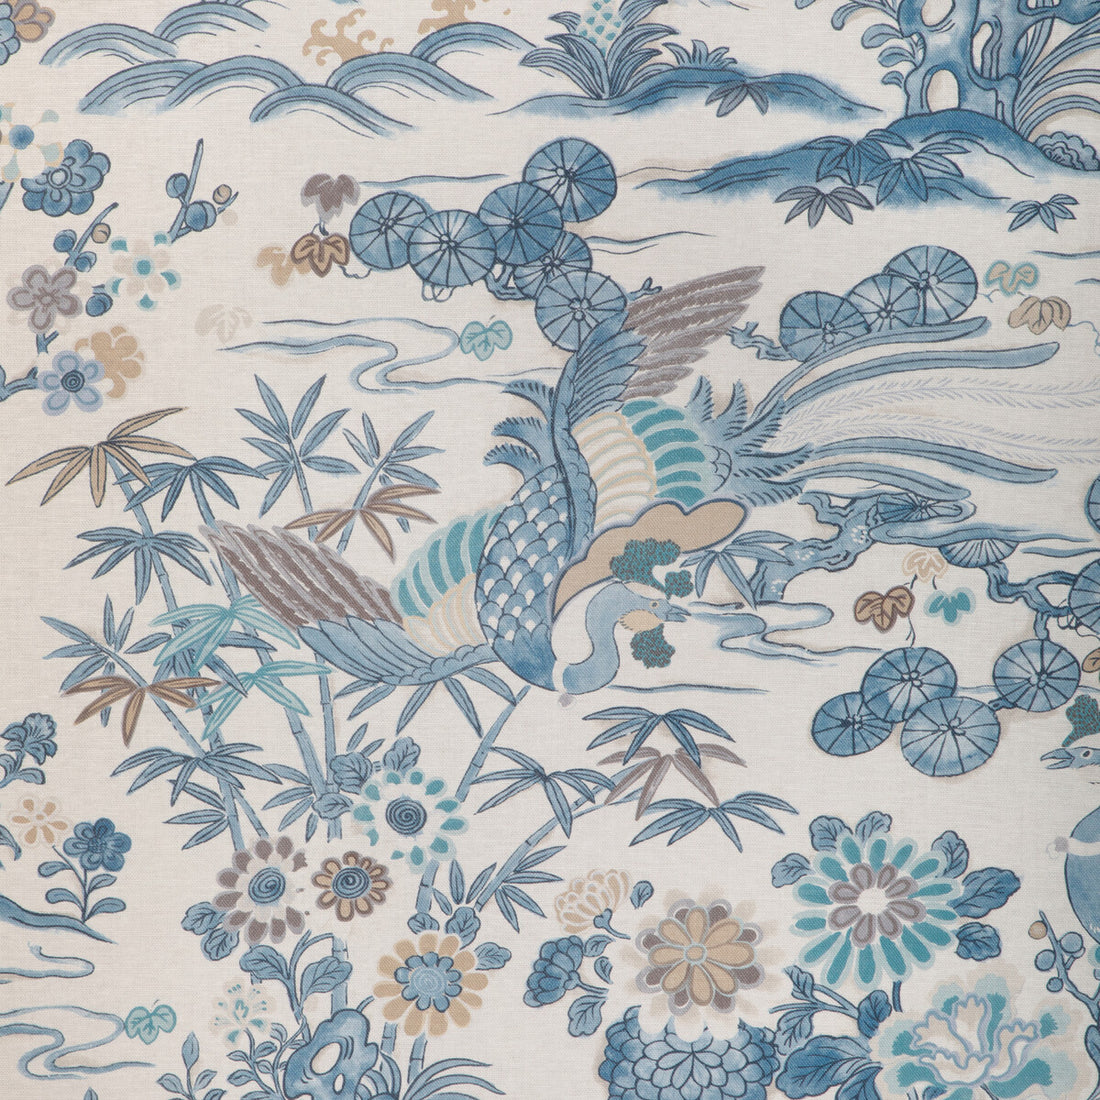 Sakura Print fabric in blue color - pattern 2023139.55.0 - by Lee Jofa in the Garden Walk collection